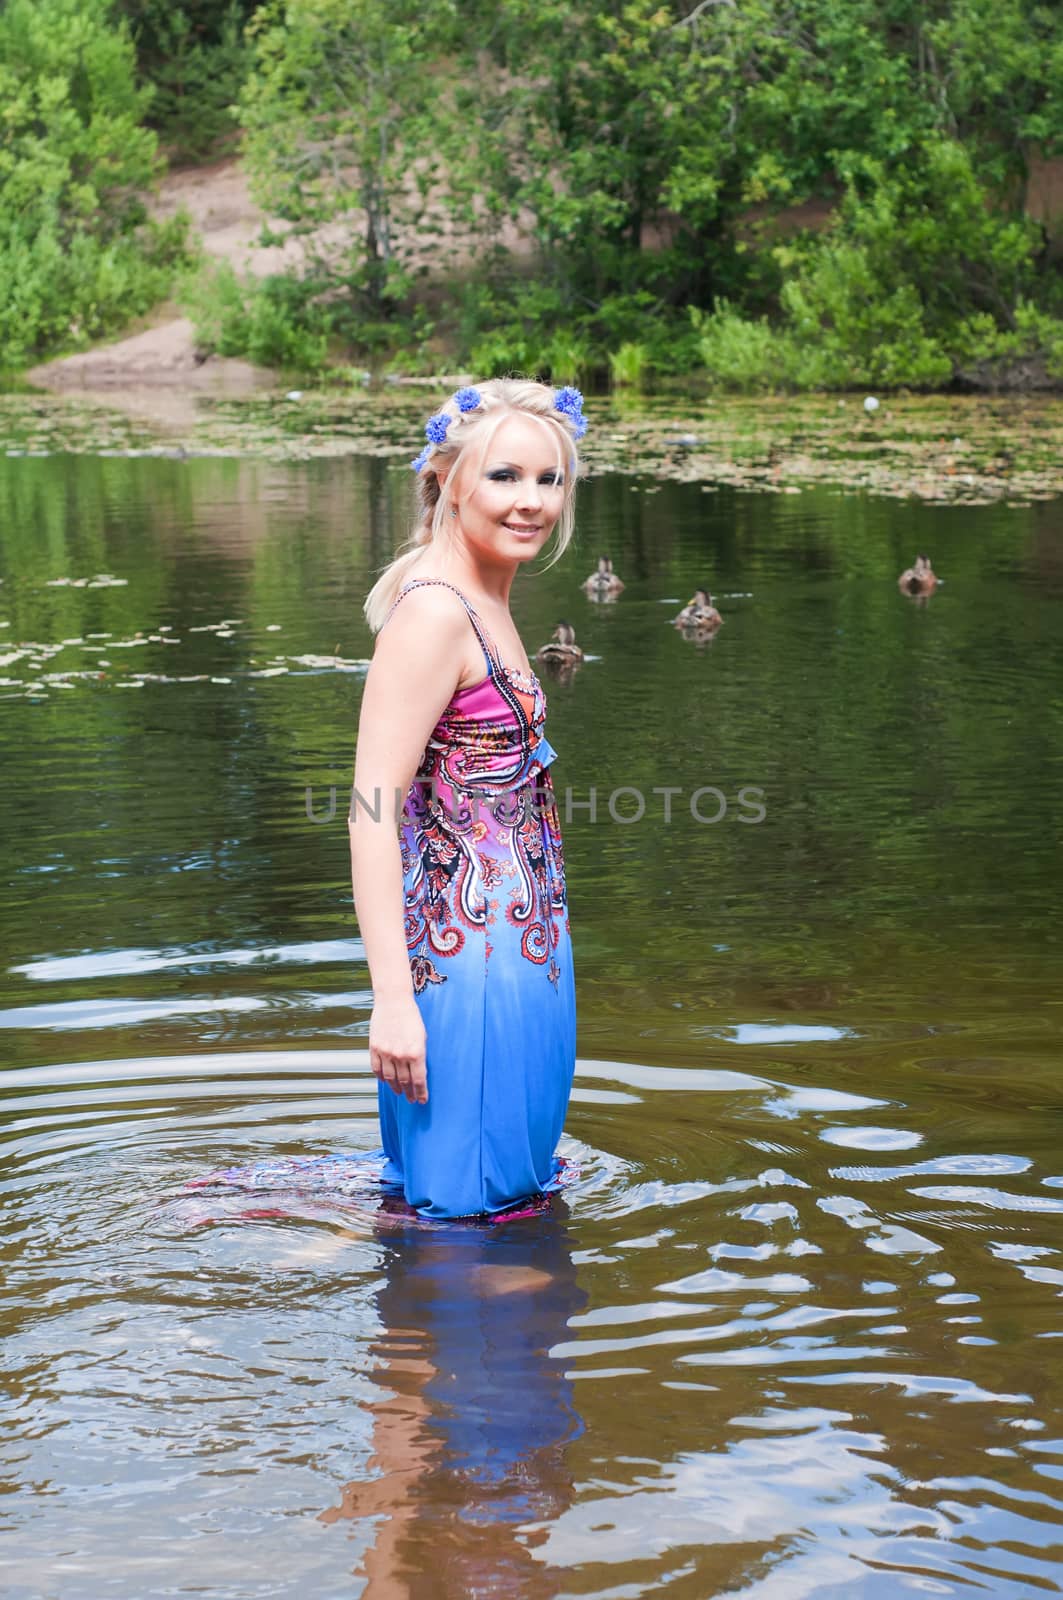 Beautiful woman in dress standing in pond by anytka